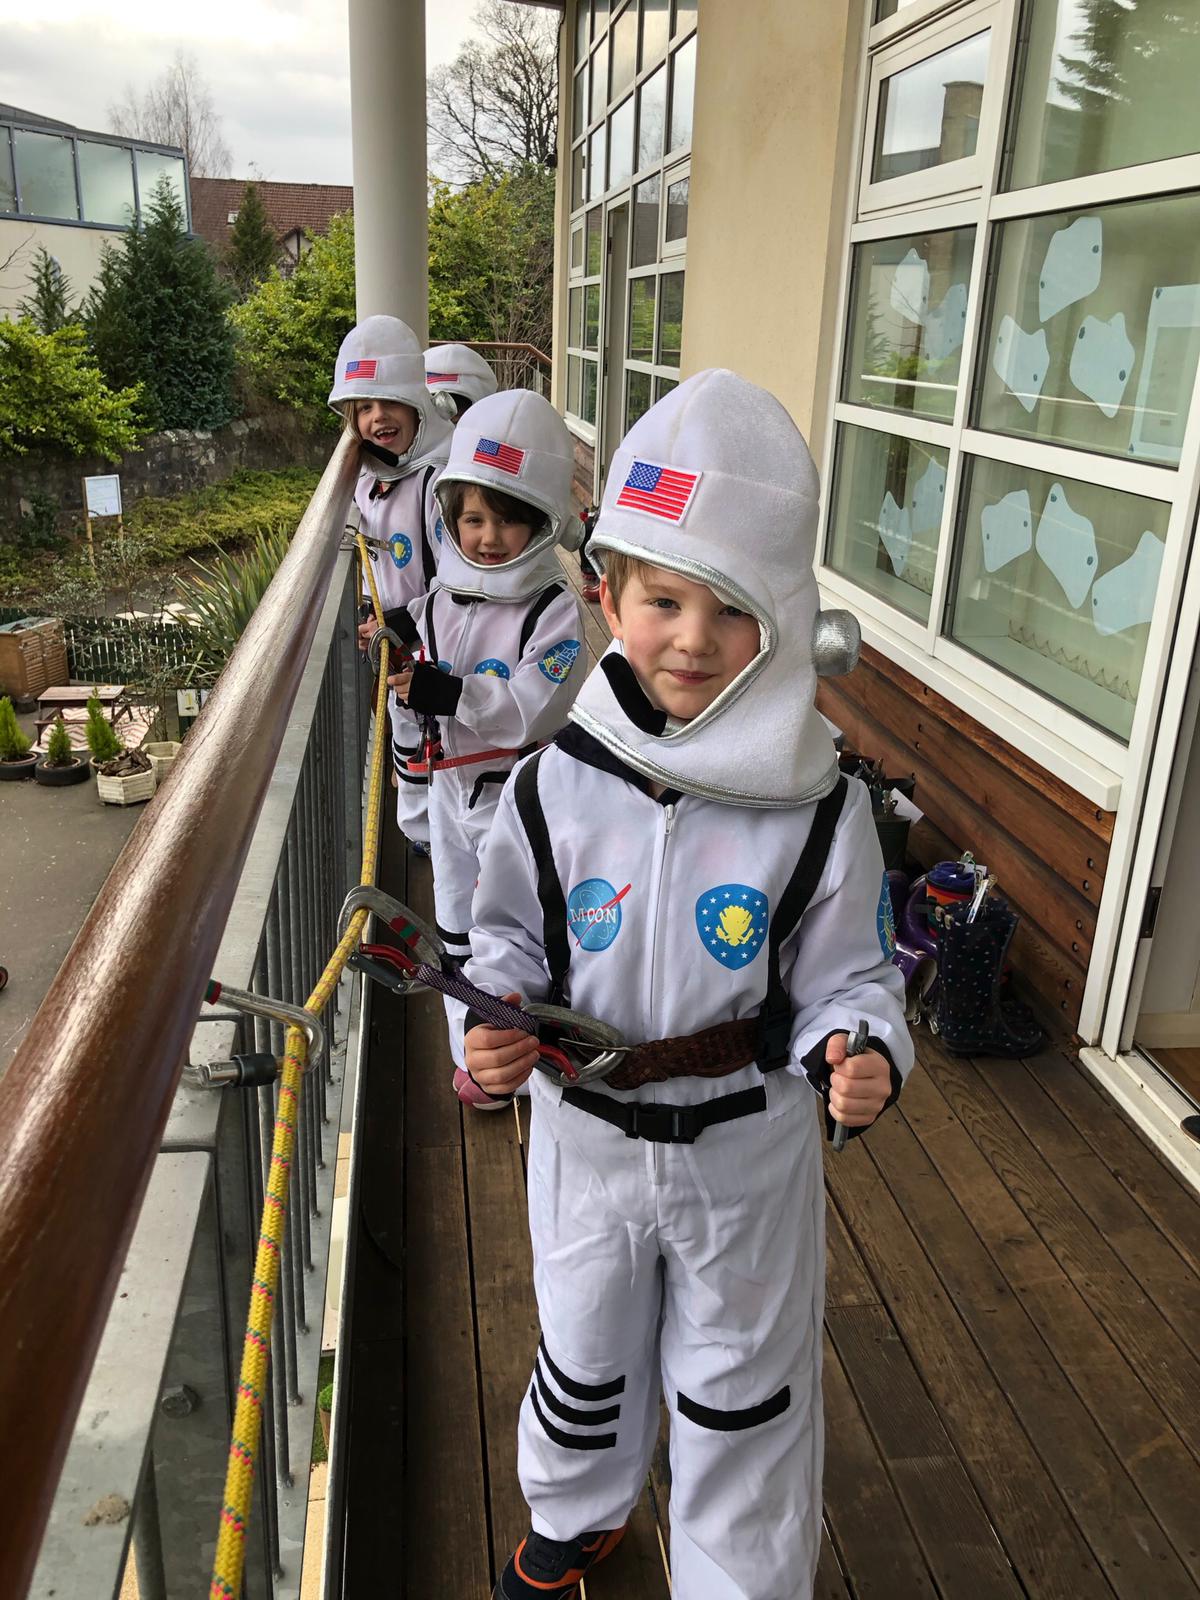 Going on a space walk